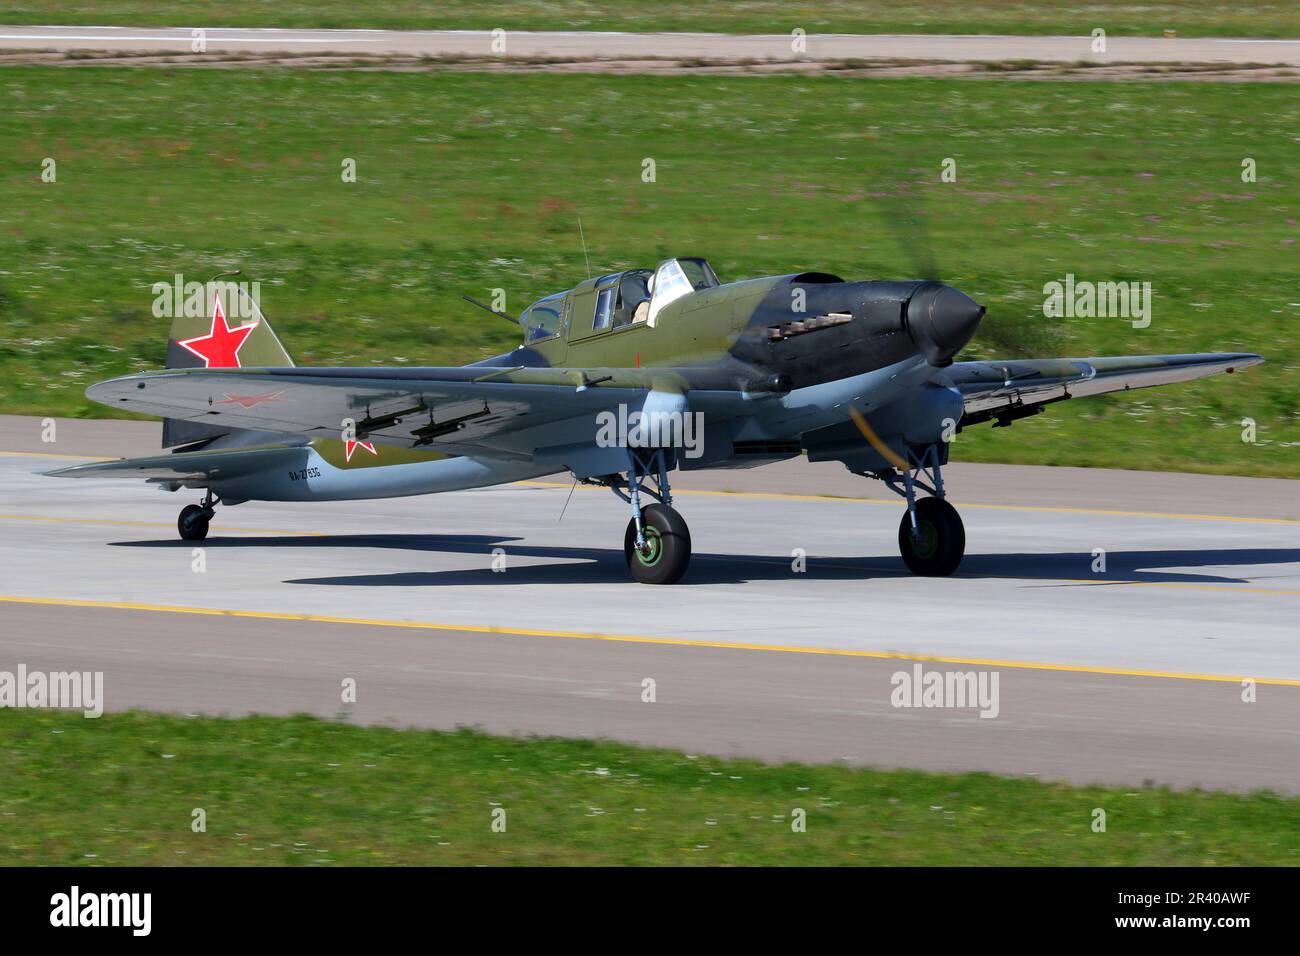 An IL-2M3 attack airplane landing on runway, Zhukovsky, Russia. Stock Photo